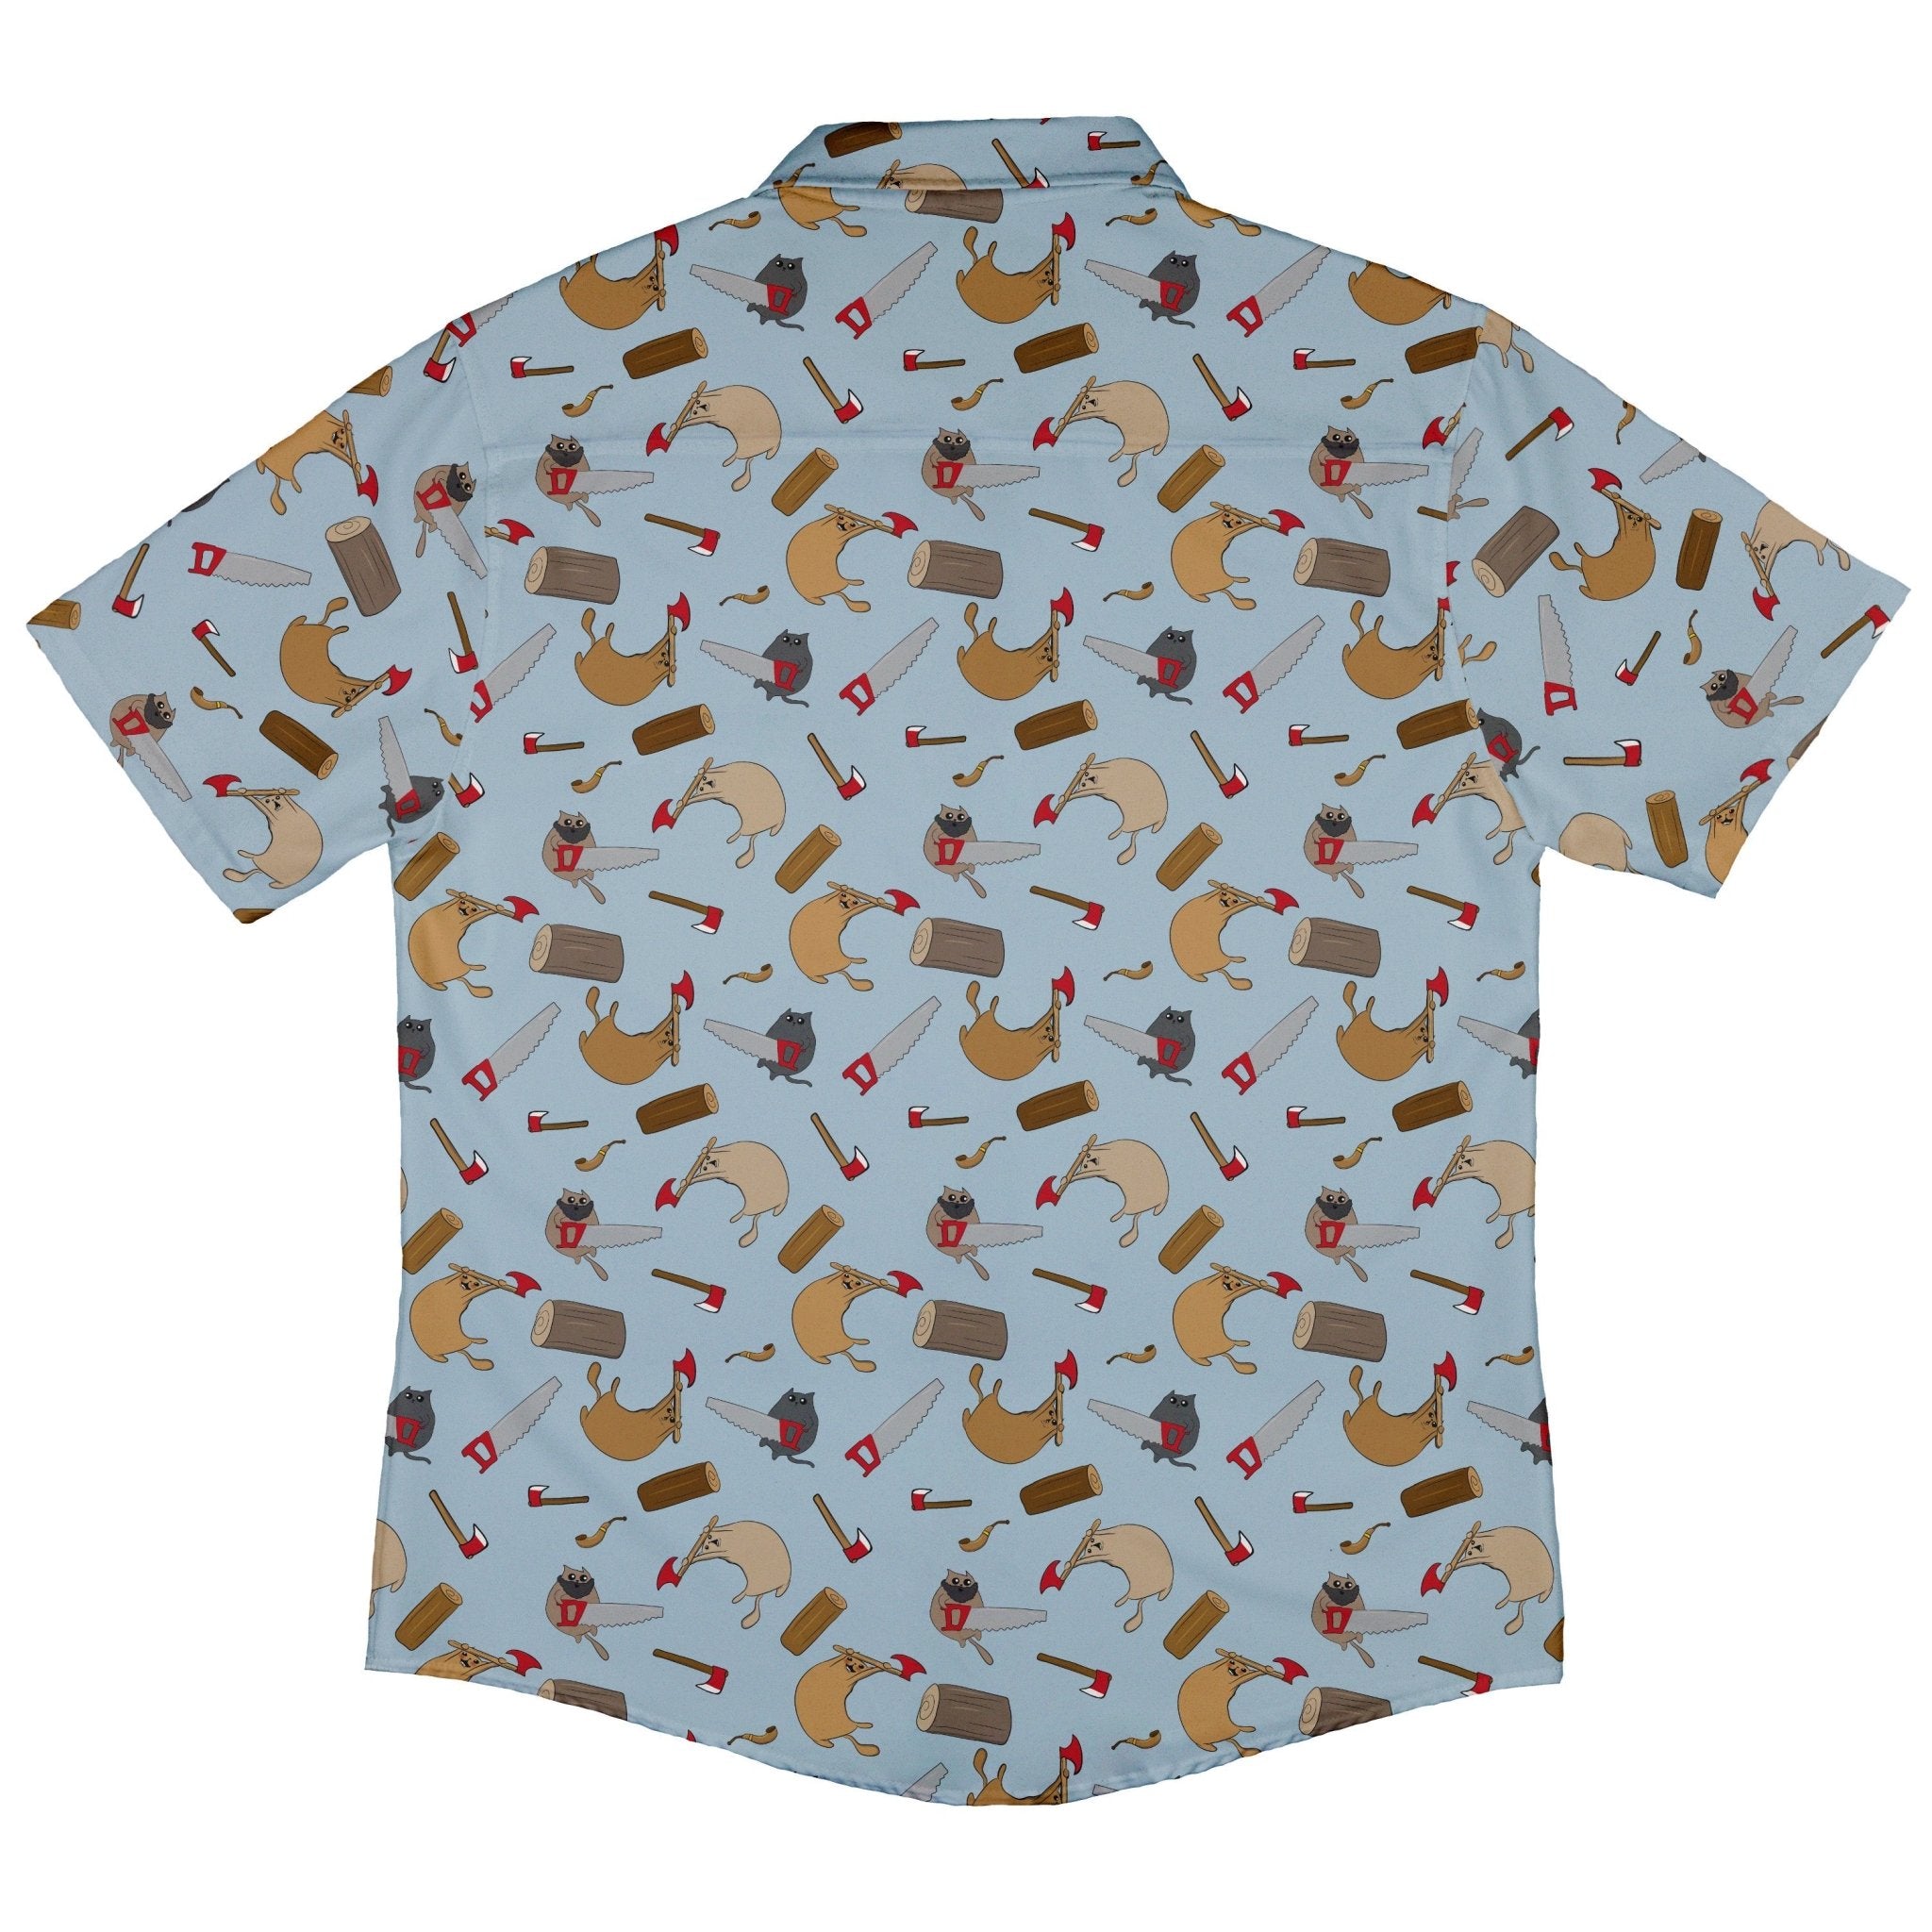 Exploding Kittens Lumber Cats Button Up Shirt - adult sizing - Animal Patterns - board game print